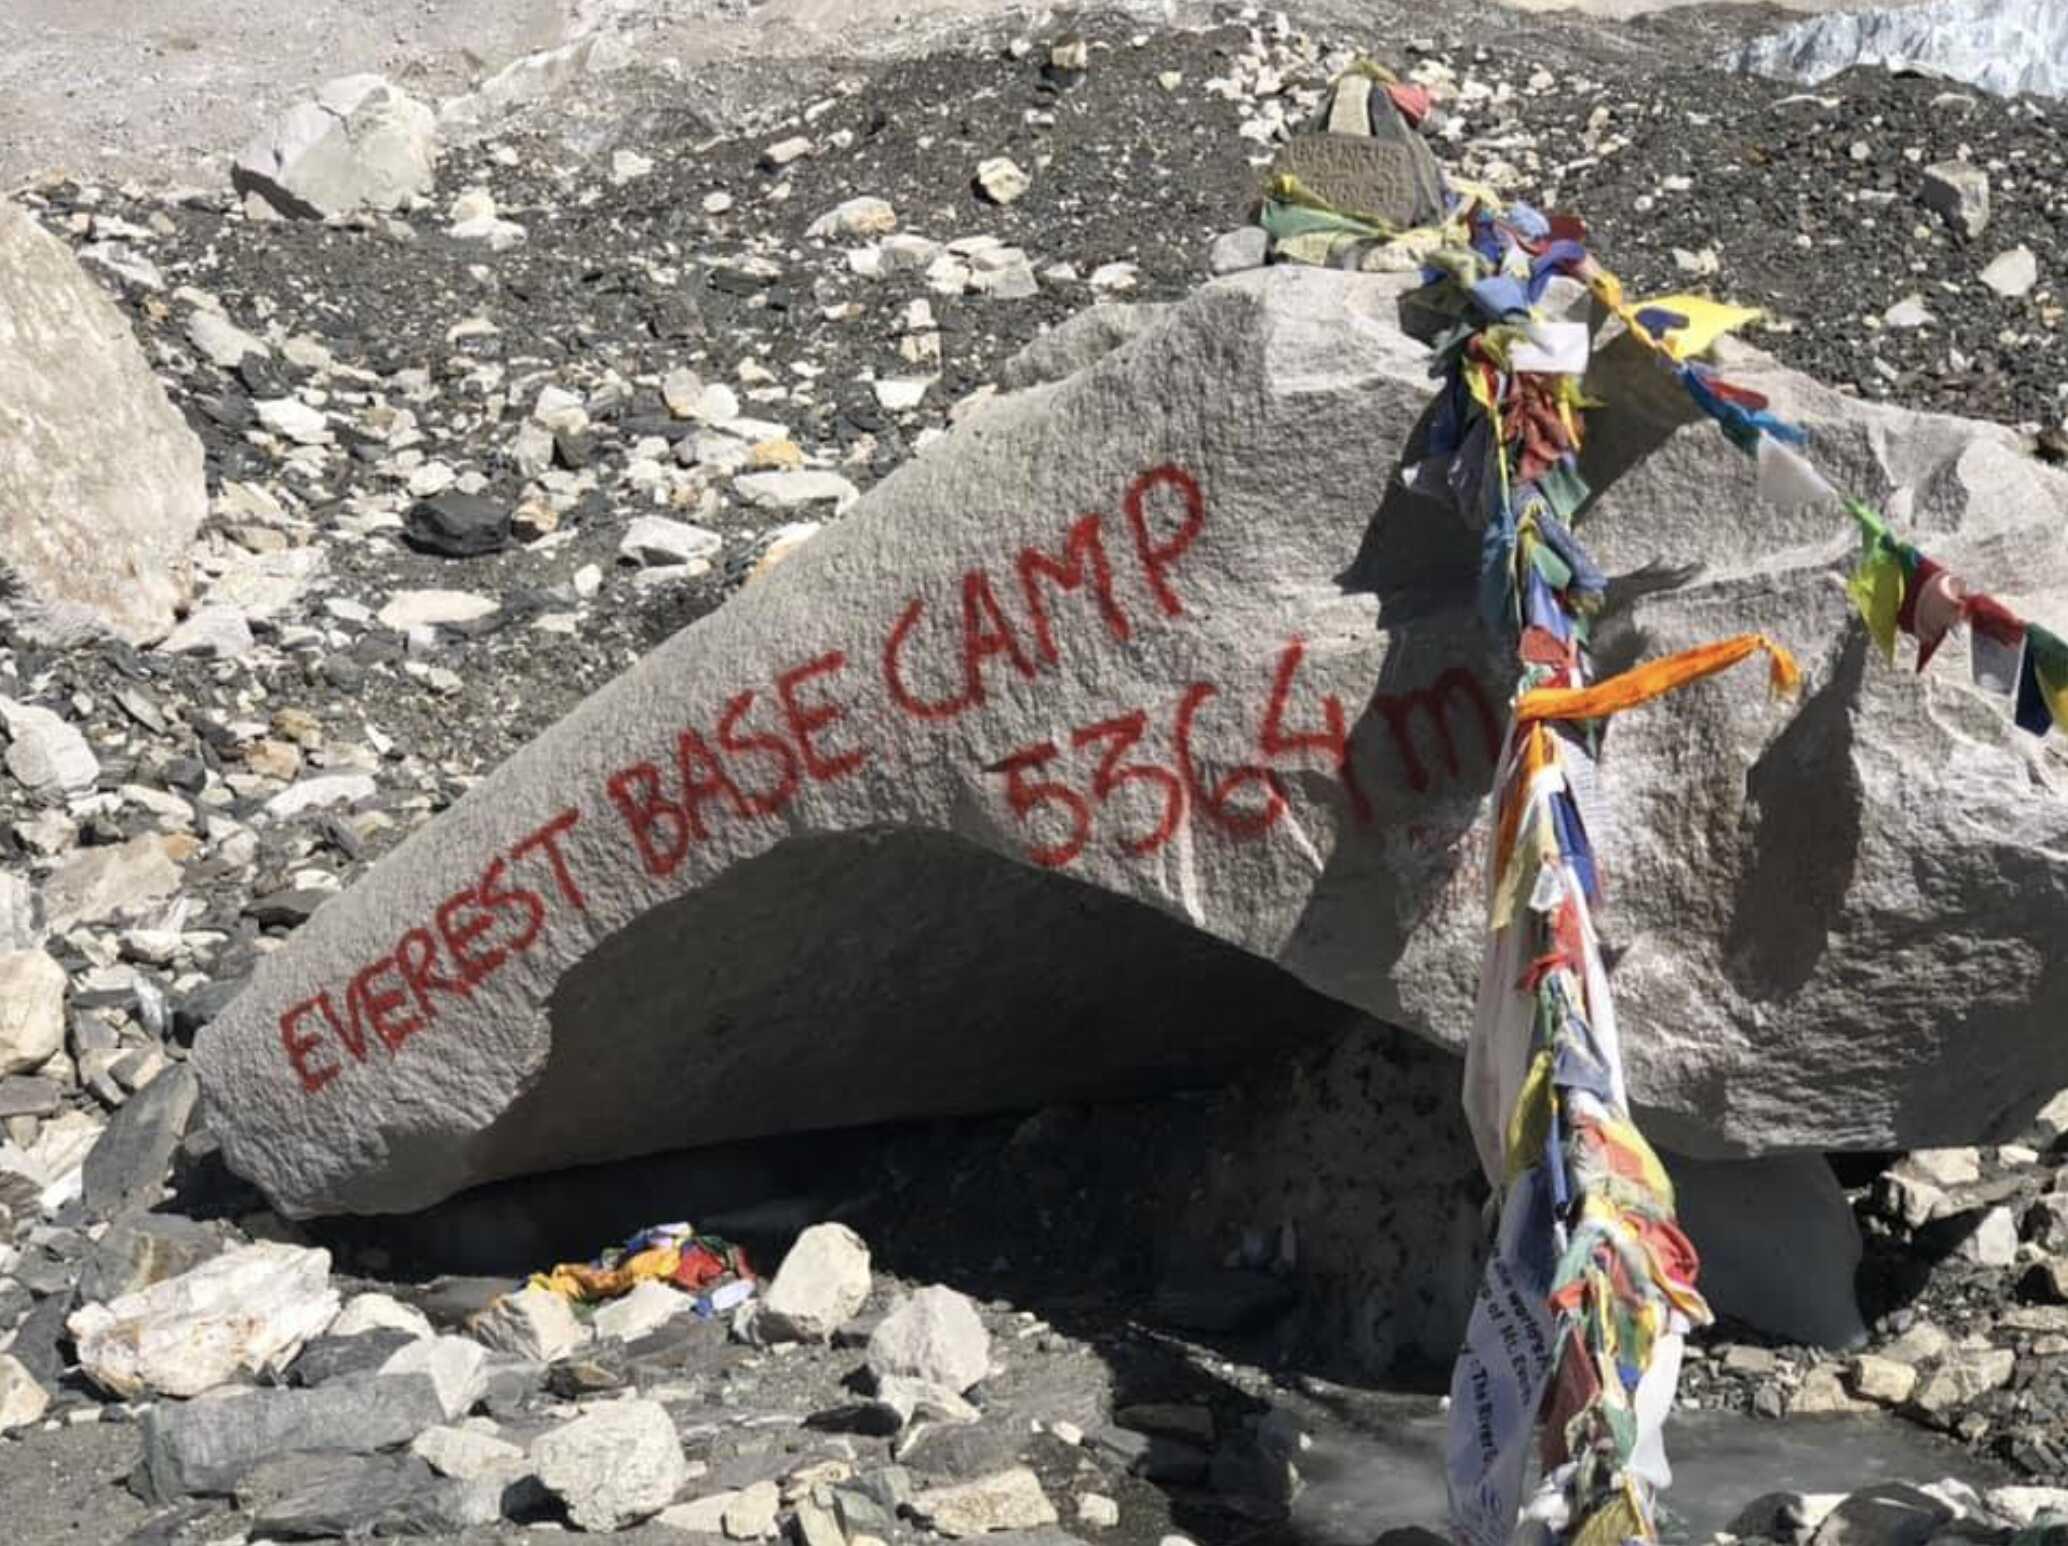 The Debate Surrounding Whether Everest Base Camp Should Be Moved Rumbles On